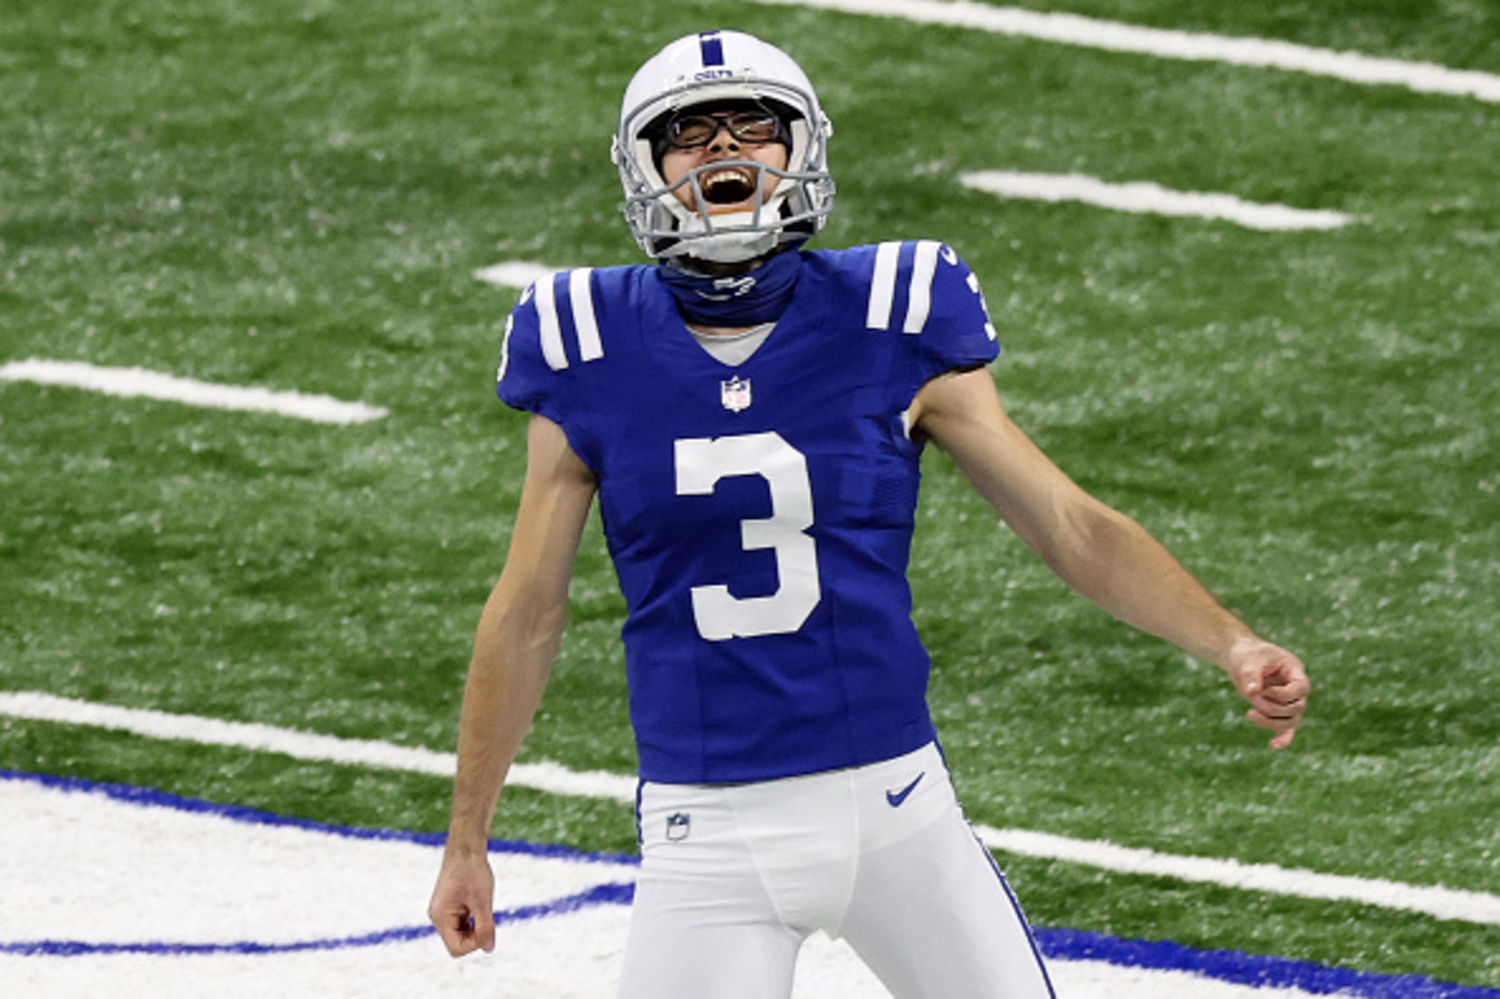 Everything You Need to Know About Colts Kicker Rodrigo Blankenship